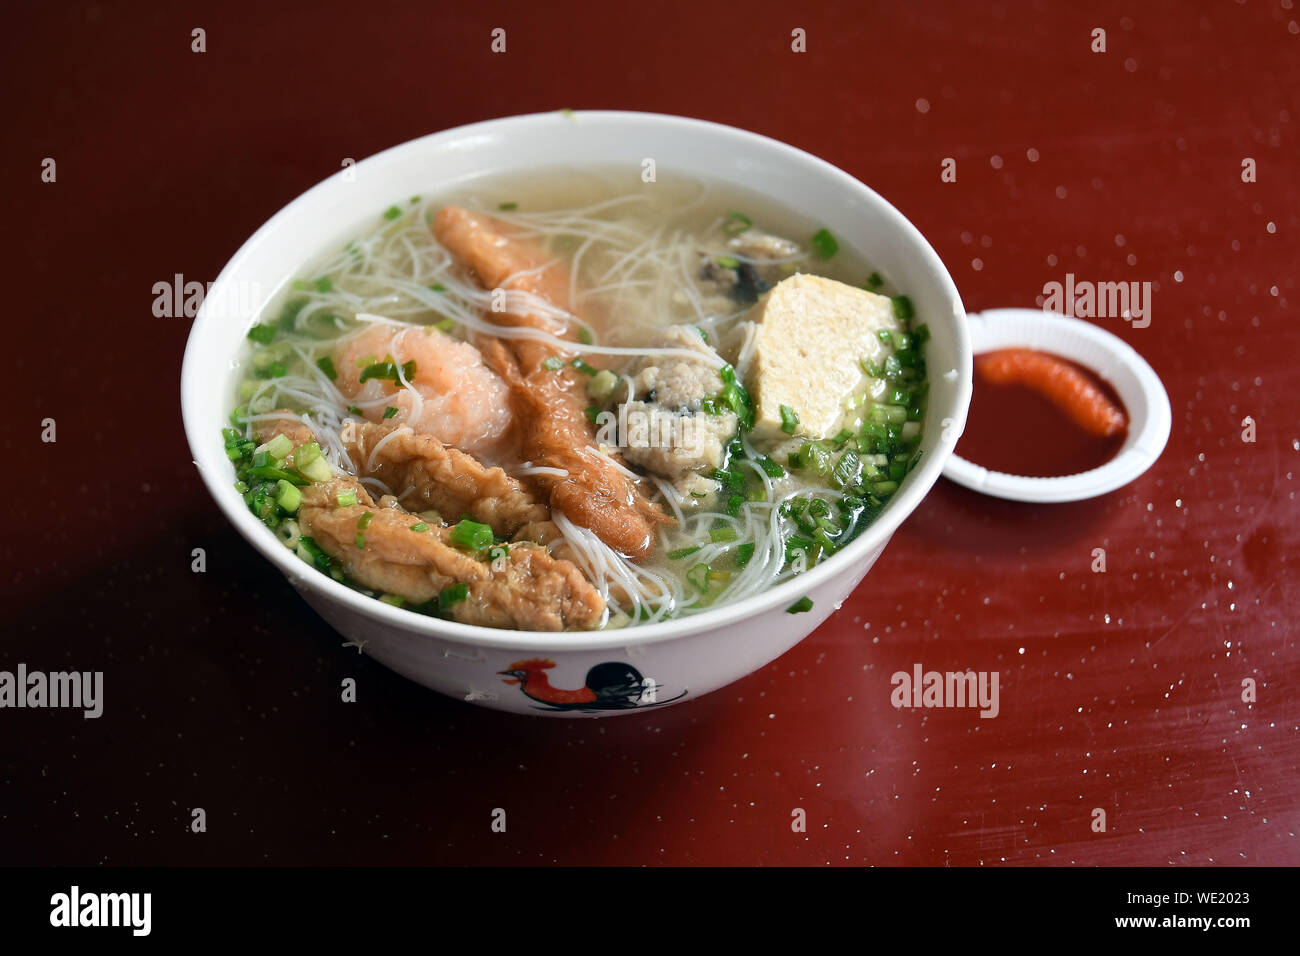 Close-up Of Asian Cuisine Stock Photo